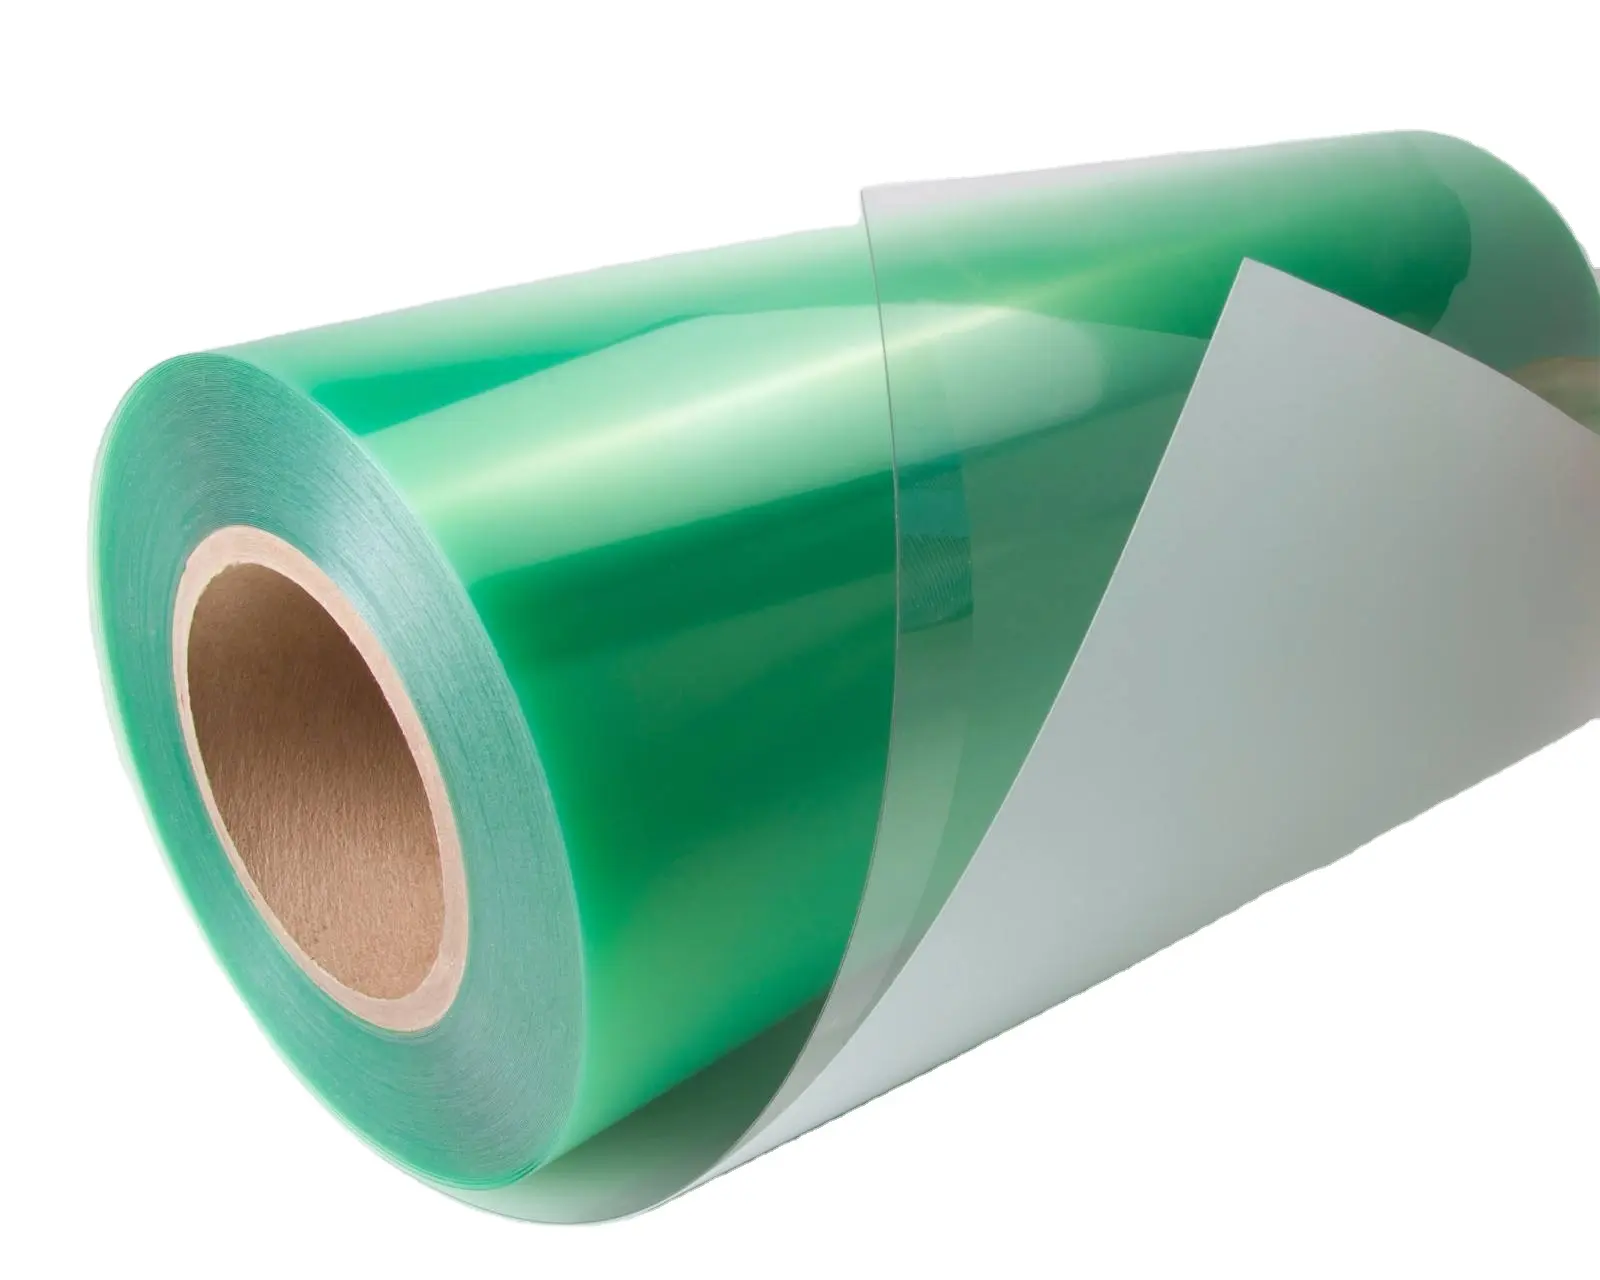 High Quality 100% New Smooth Green Color PVC Soft Sheet Transparent For Thermoforming Flexible pvc Sheets Packaging